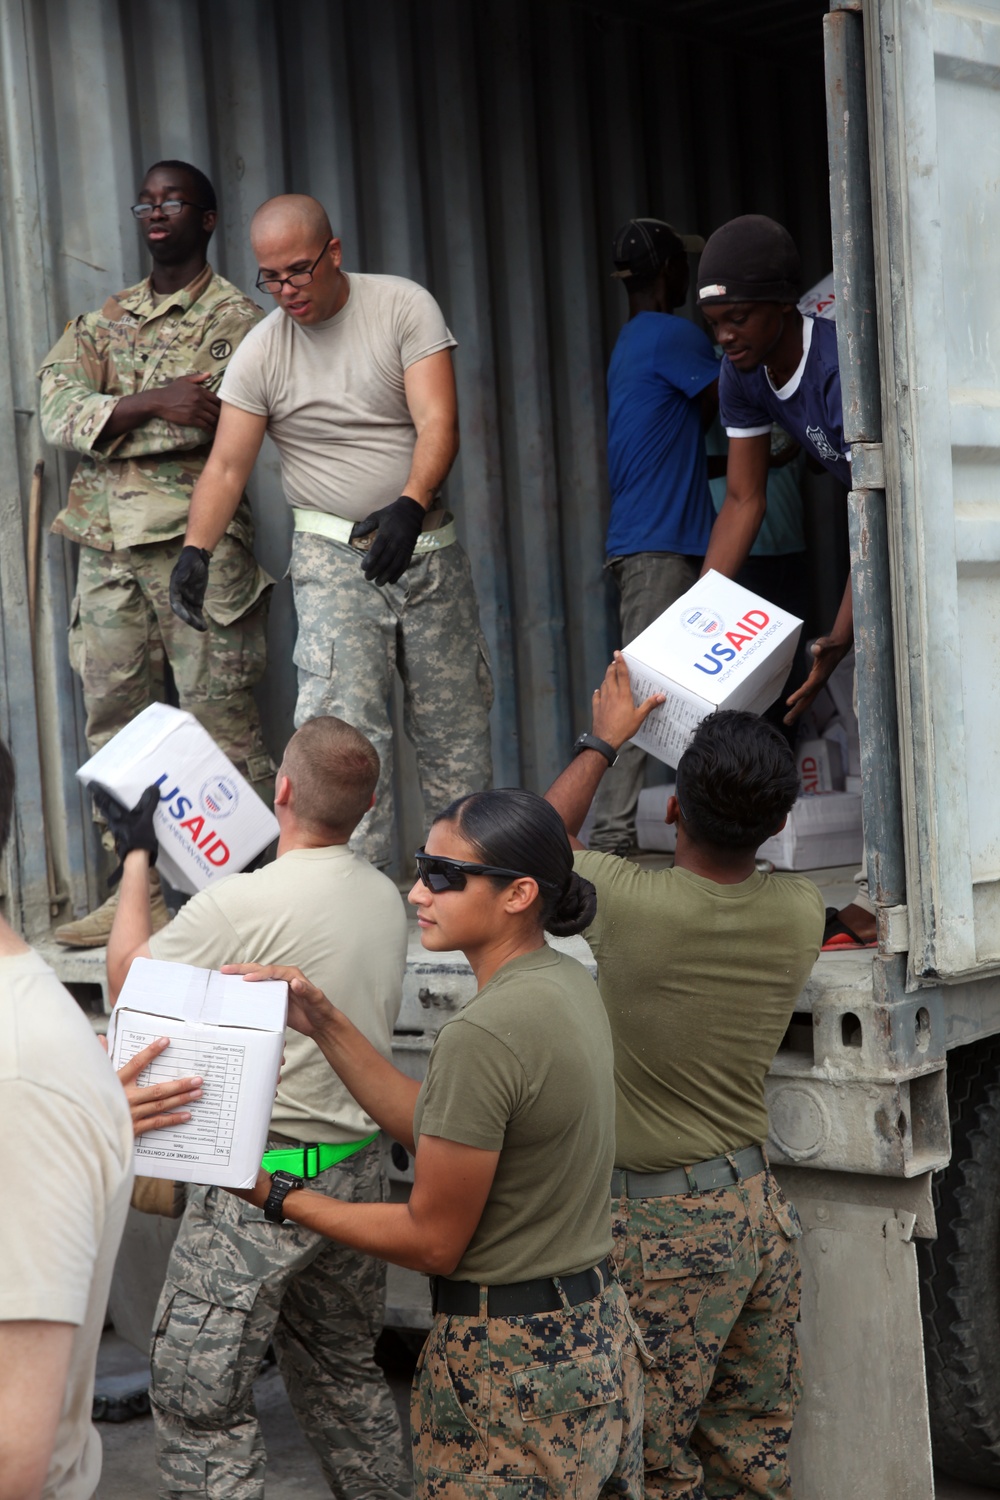 24th MEU radio operator check comms while delivering relief supplies with JTF Matthew